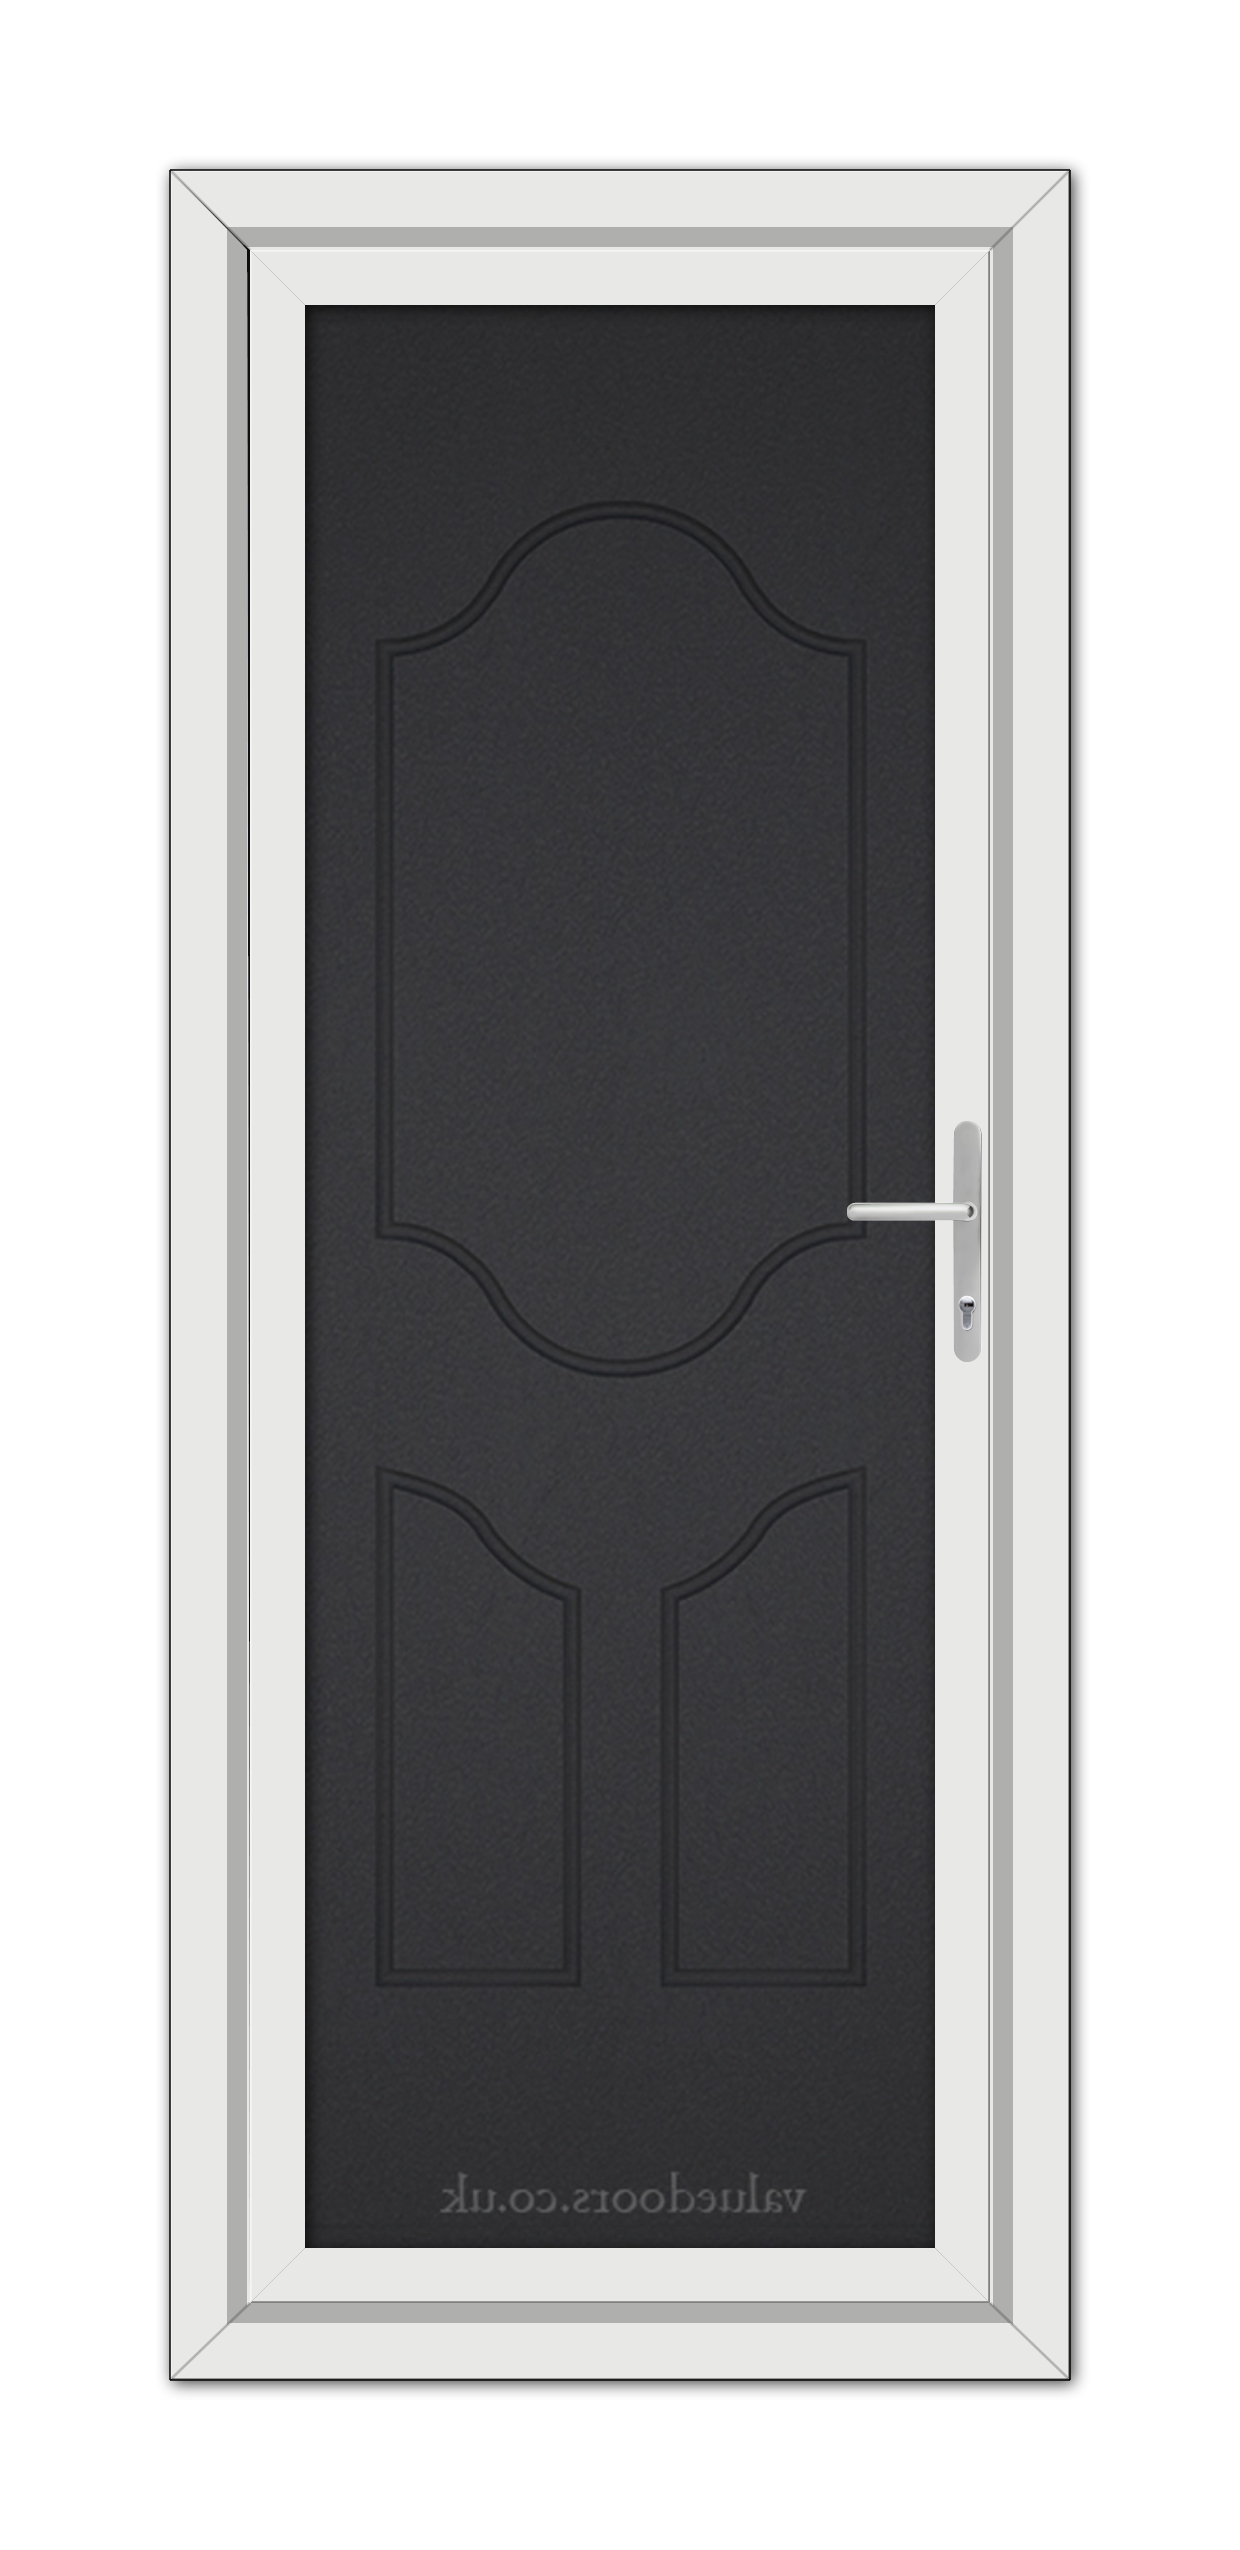 A Black Brown Althorpe Solid uPVC door with a white frame and a metallic handle, viewed from the front.